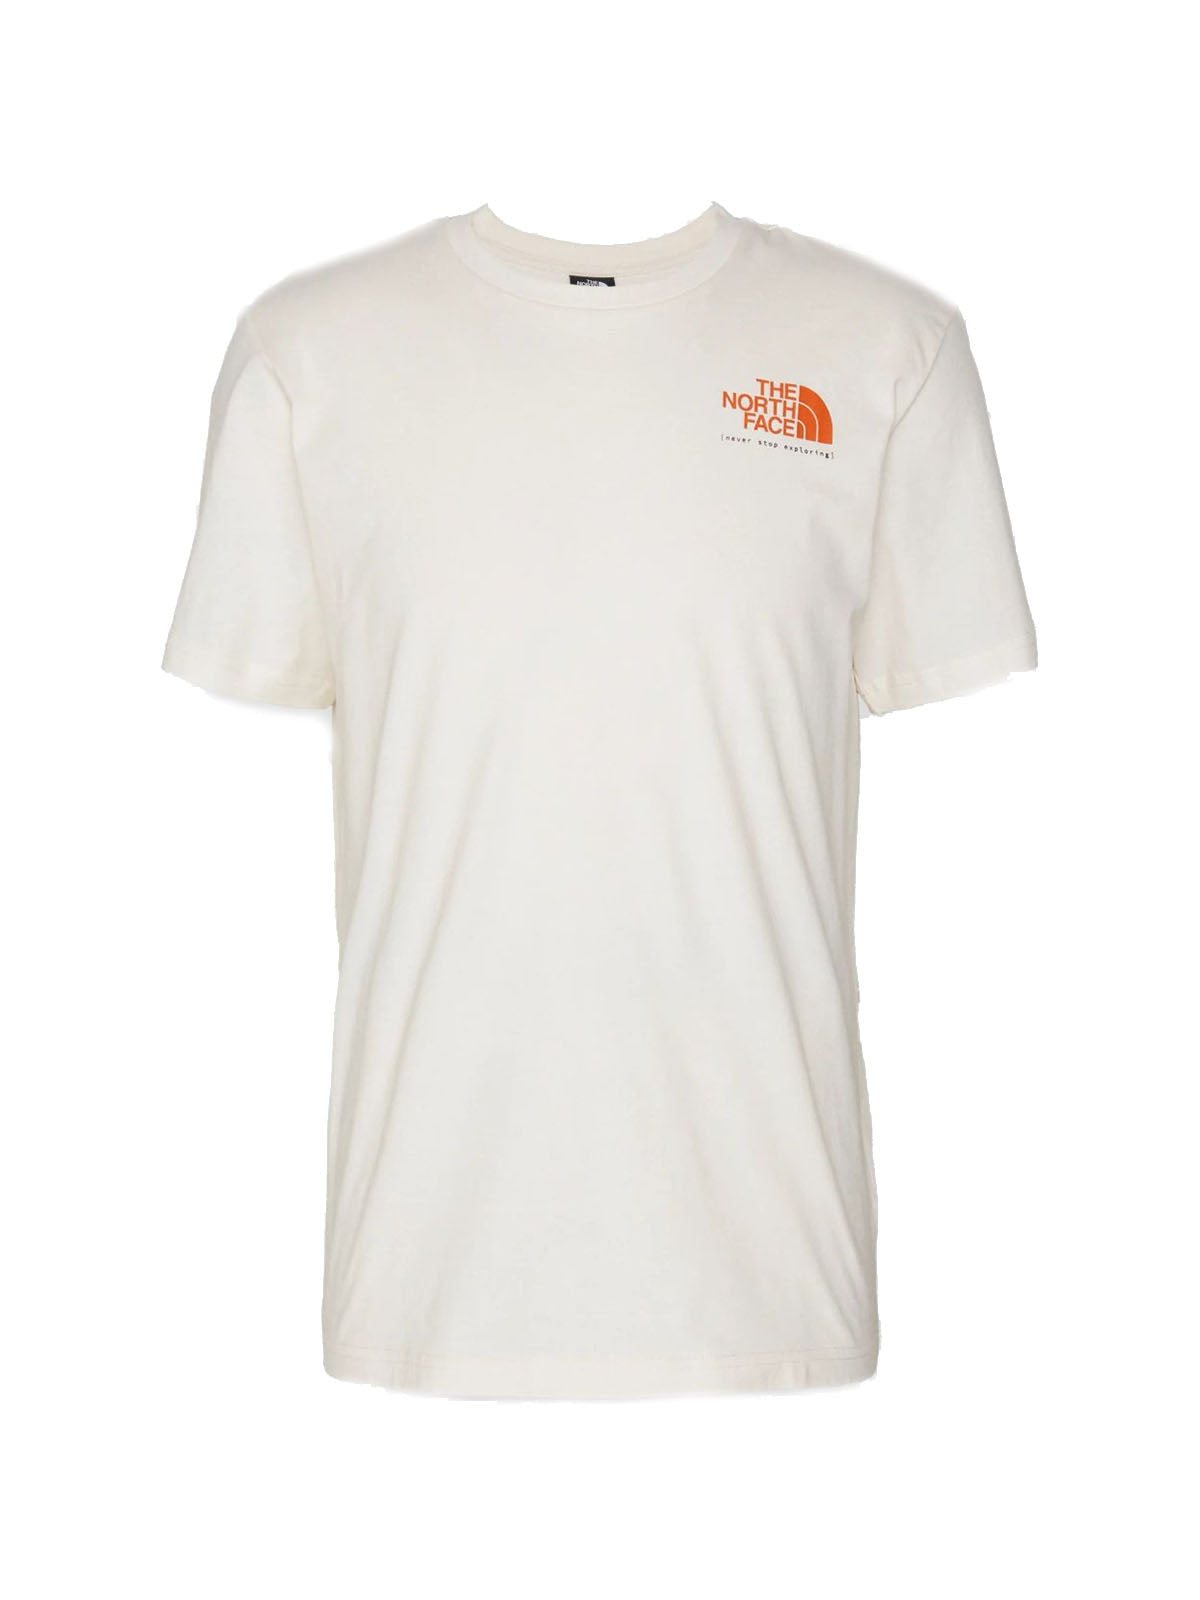 T-shirt Uomo The North Face - Graphic 3 T-Shirt - Bianco